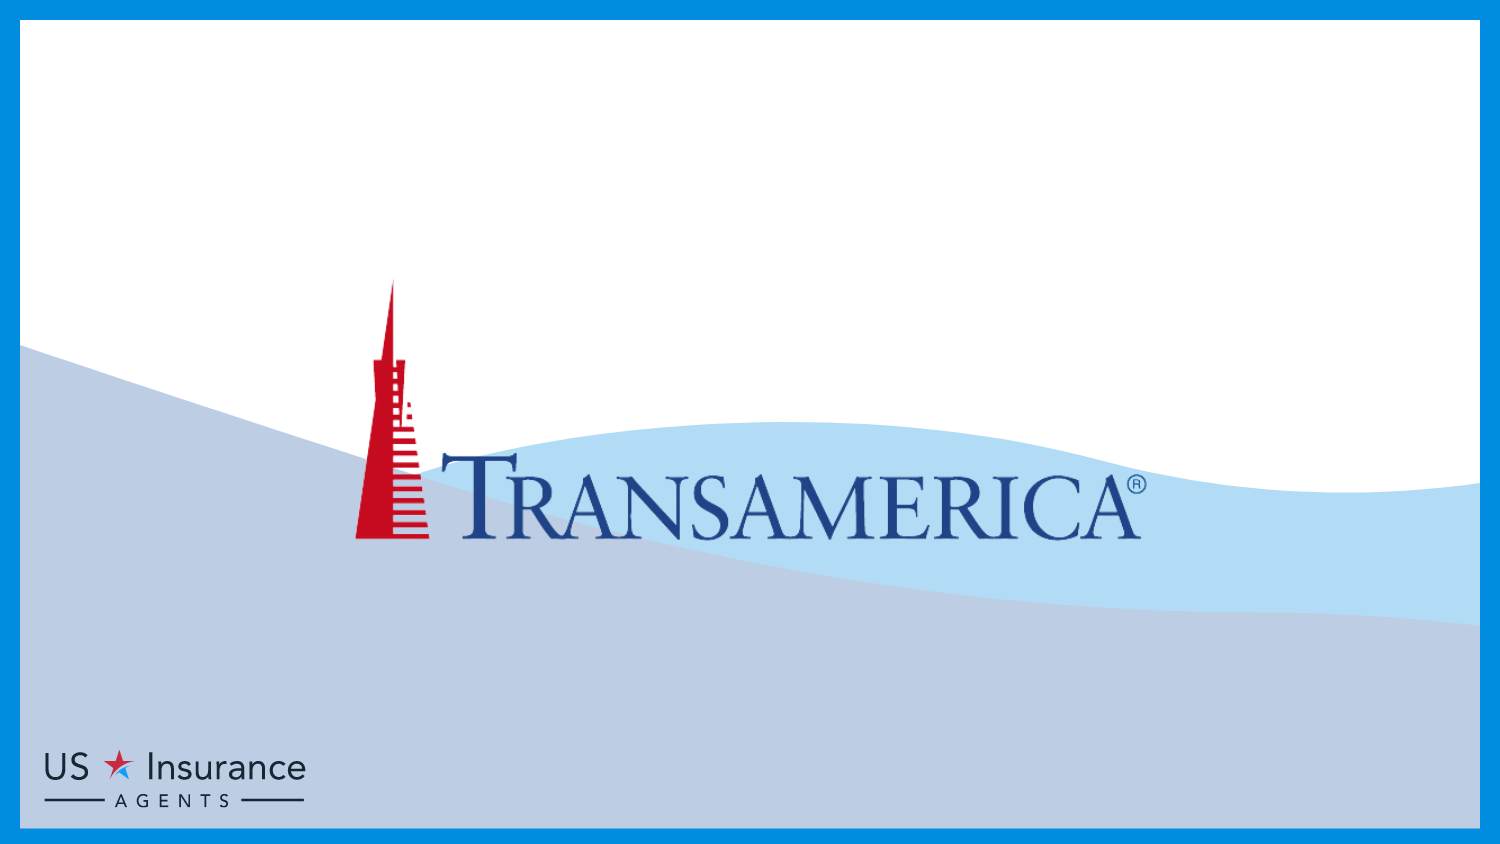 Transamerica: Best Life Insurance for Overweight People